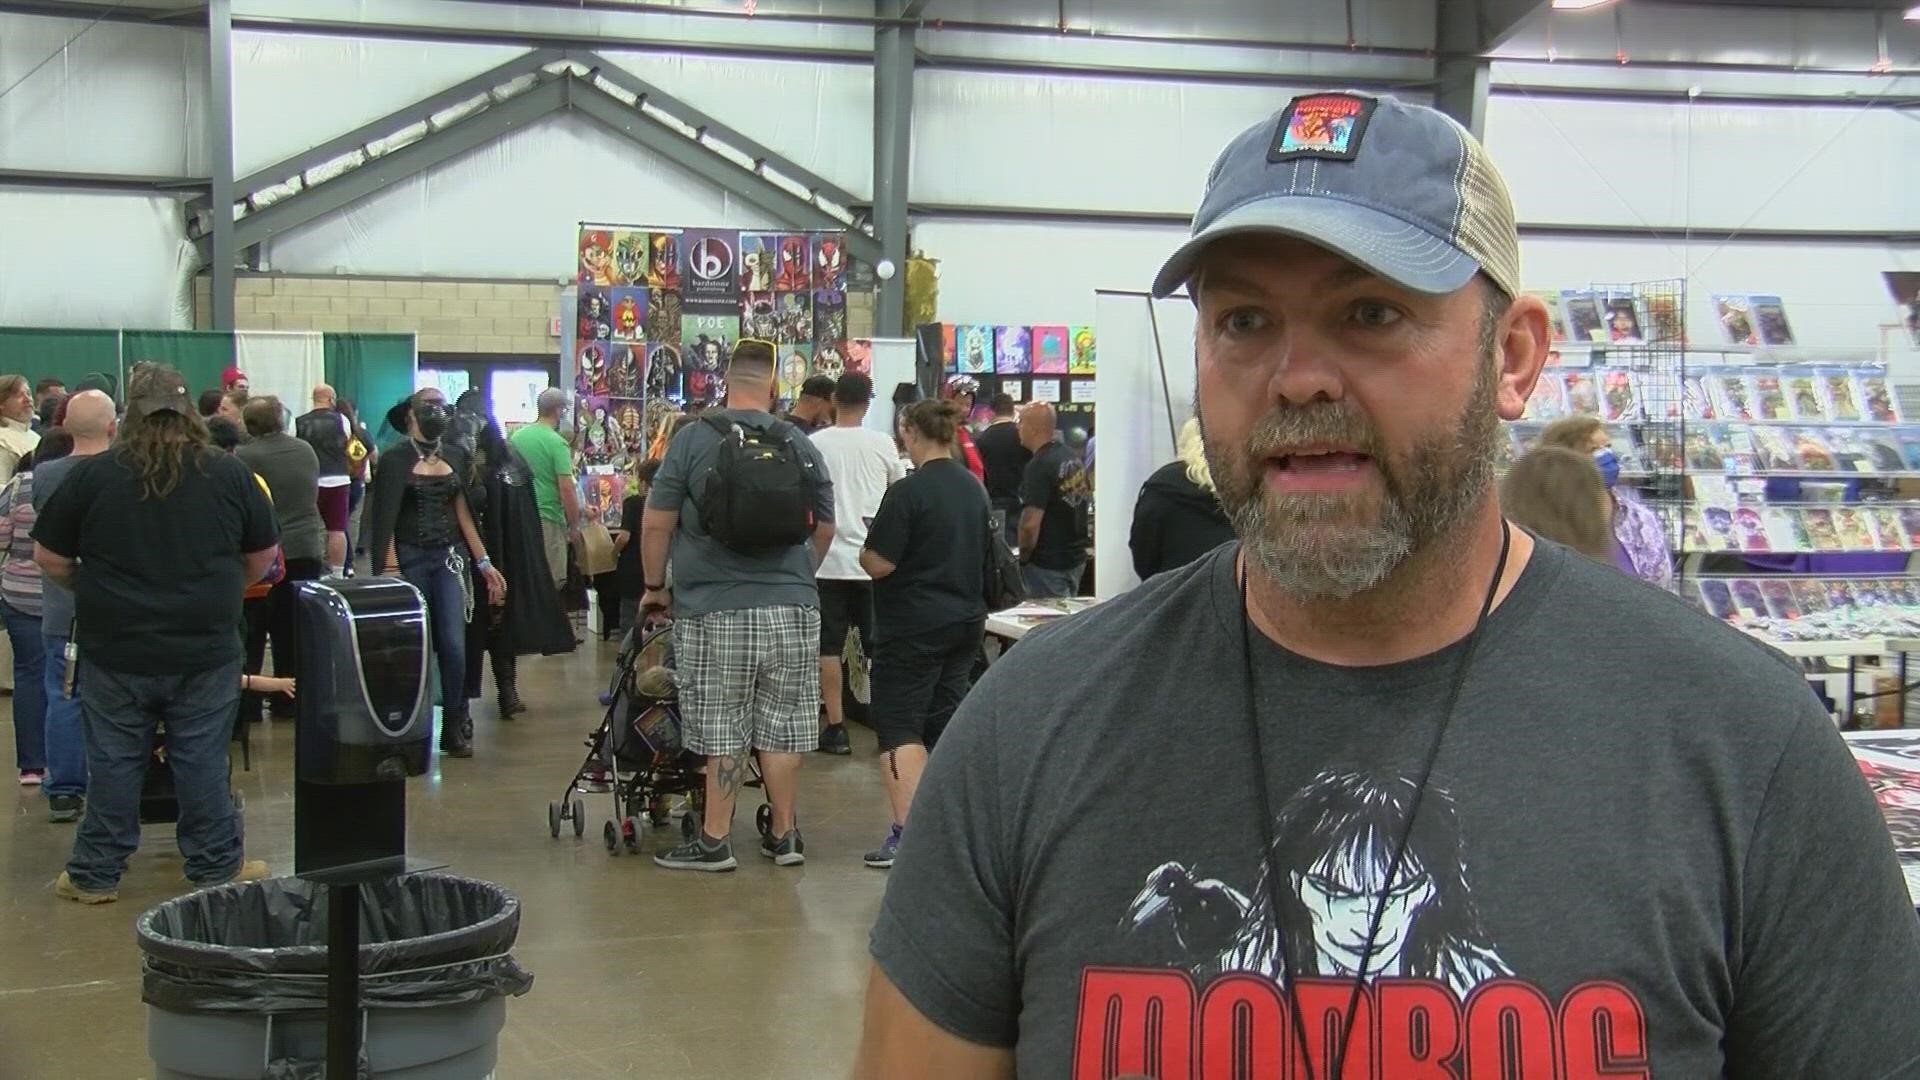 The excitement was in the air at the Monroe Pop Fest on Sunday as comic cons and other pop culture events begin returning in person.